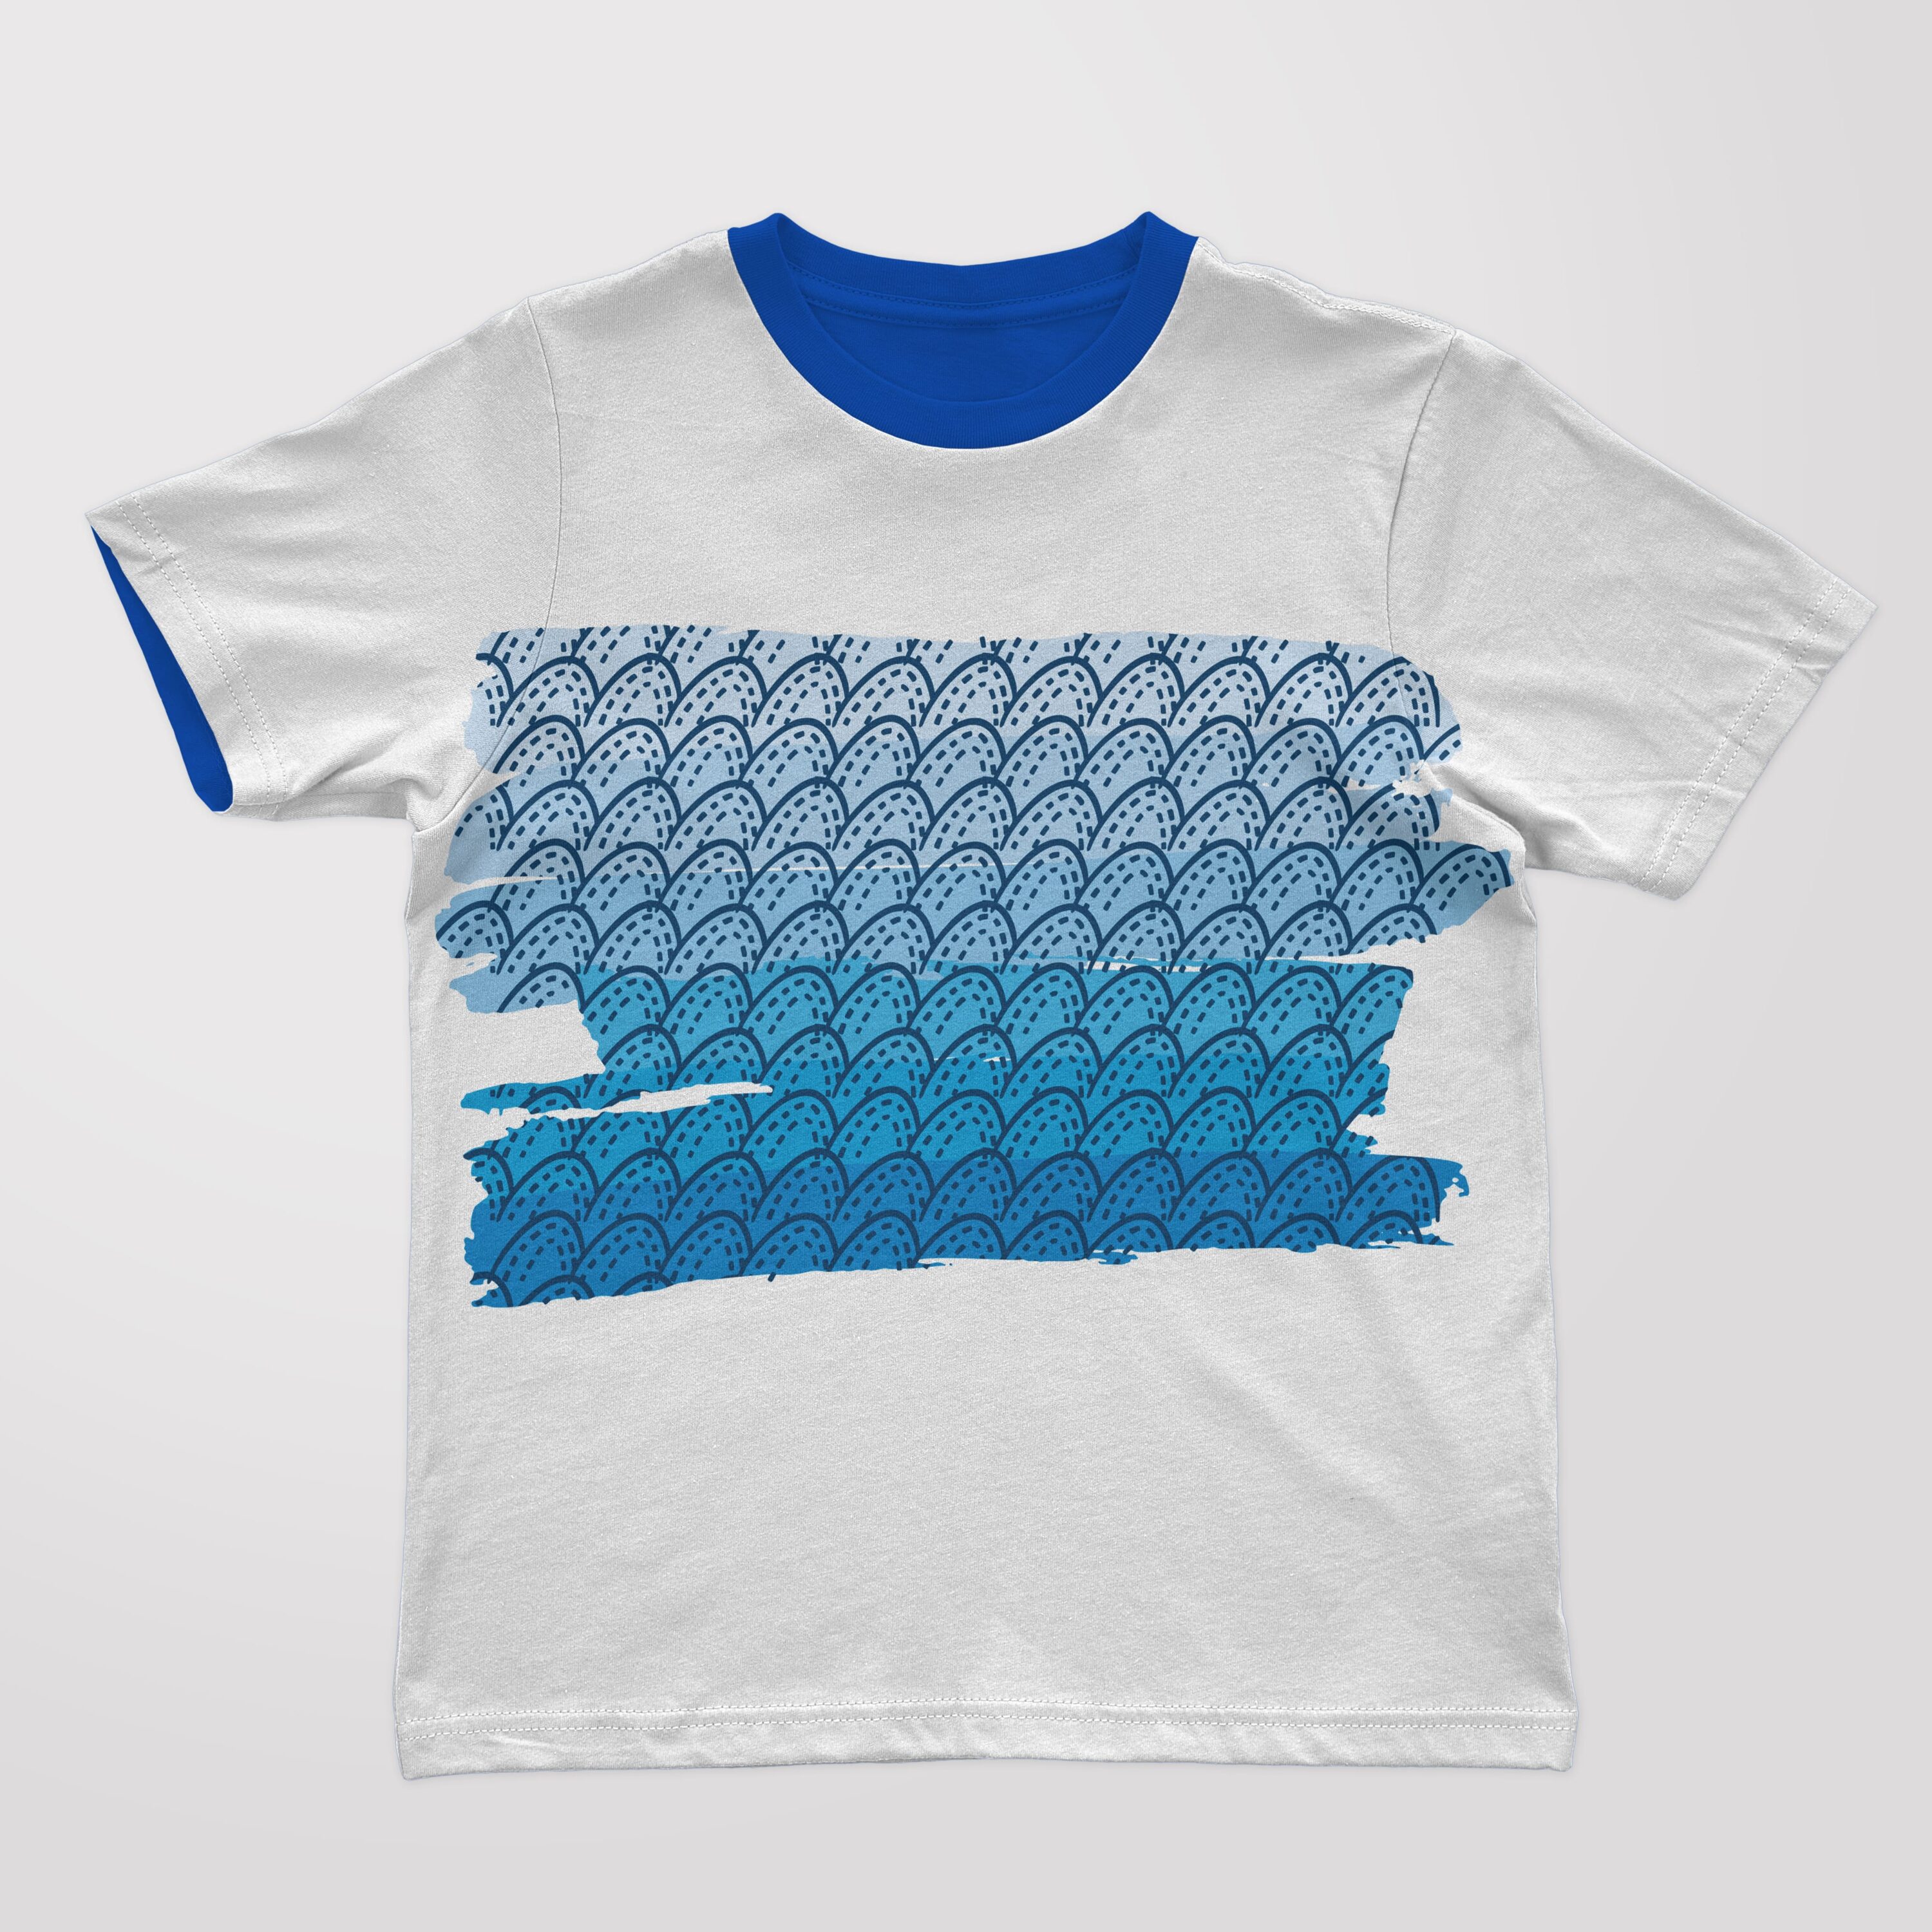 Creative t-shirt with the scales graphic.